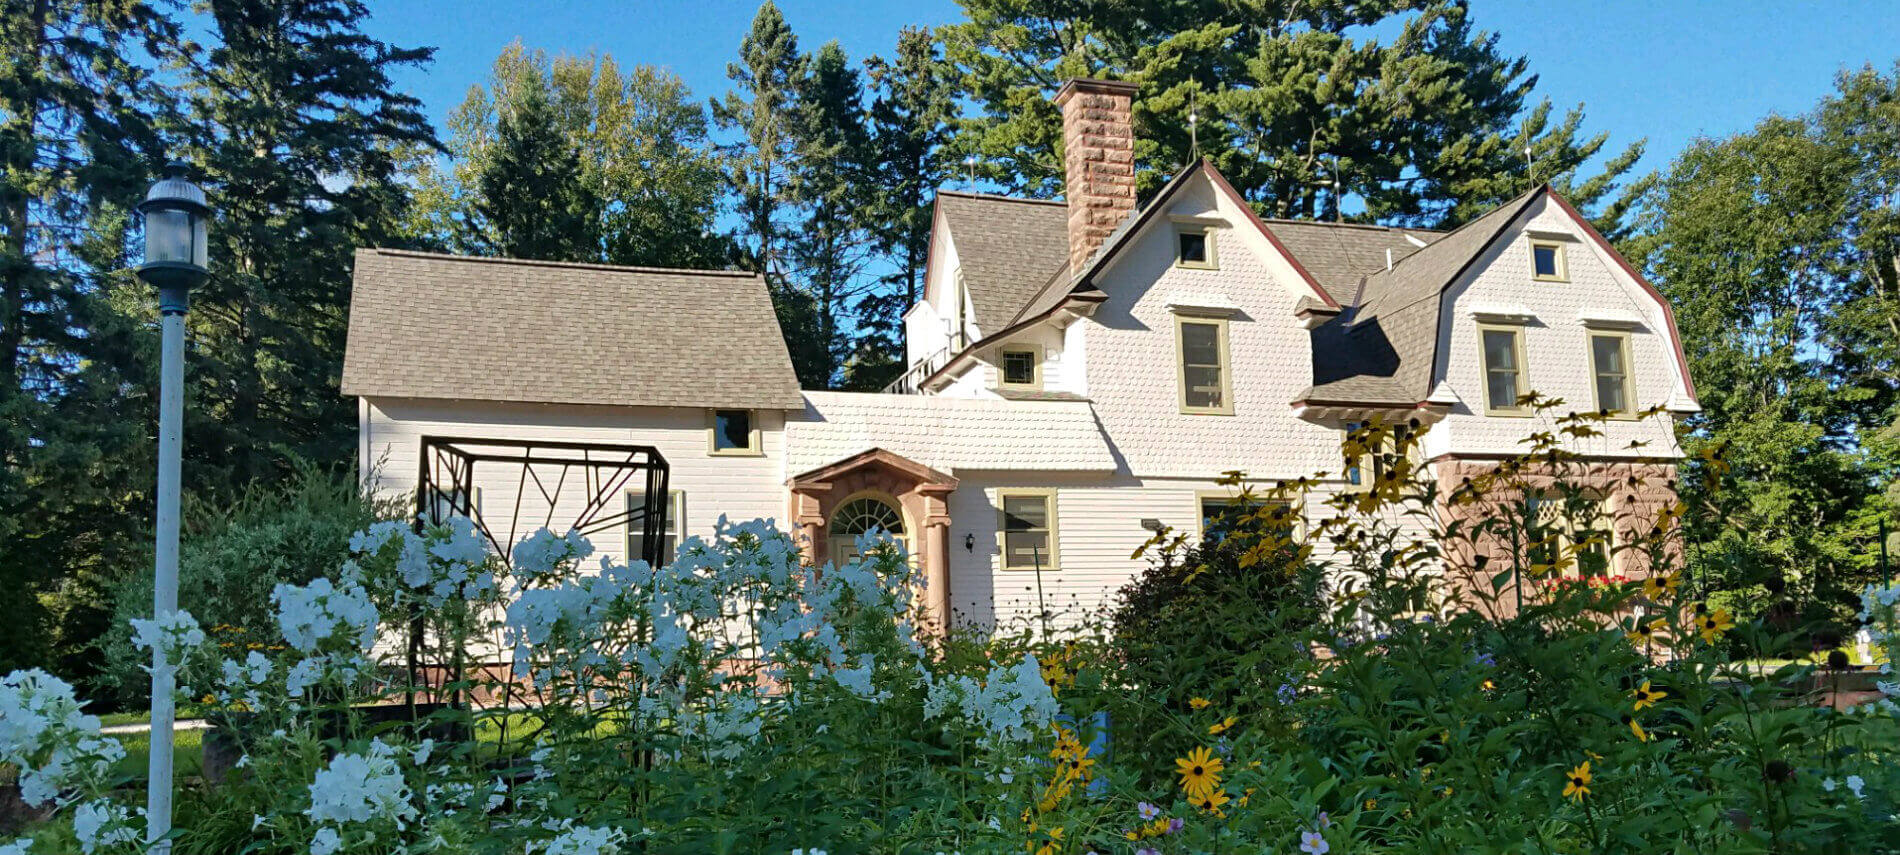 Exterior view of inn surrounded by tall green trees, colorful flowers and blue skies